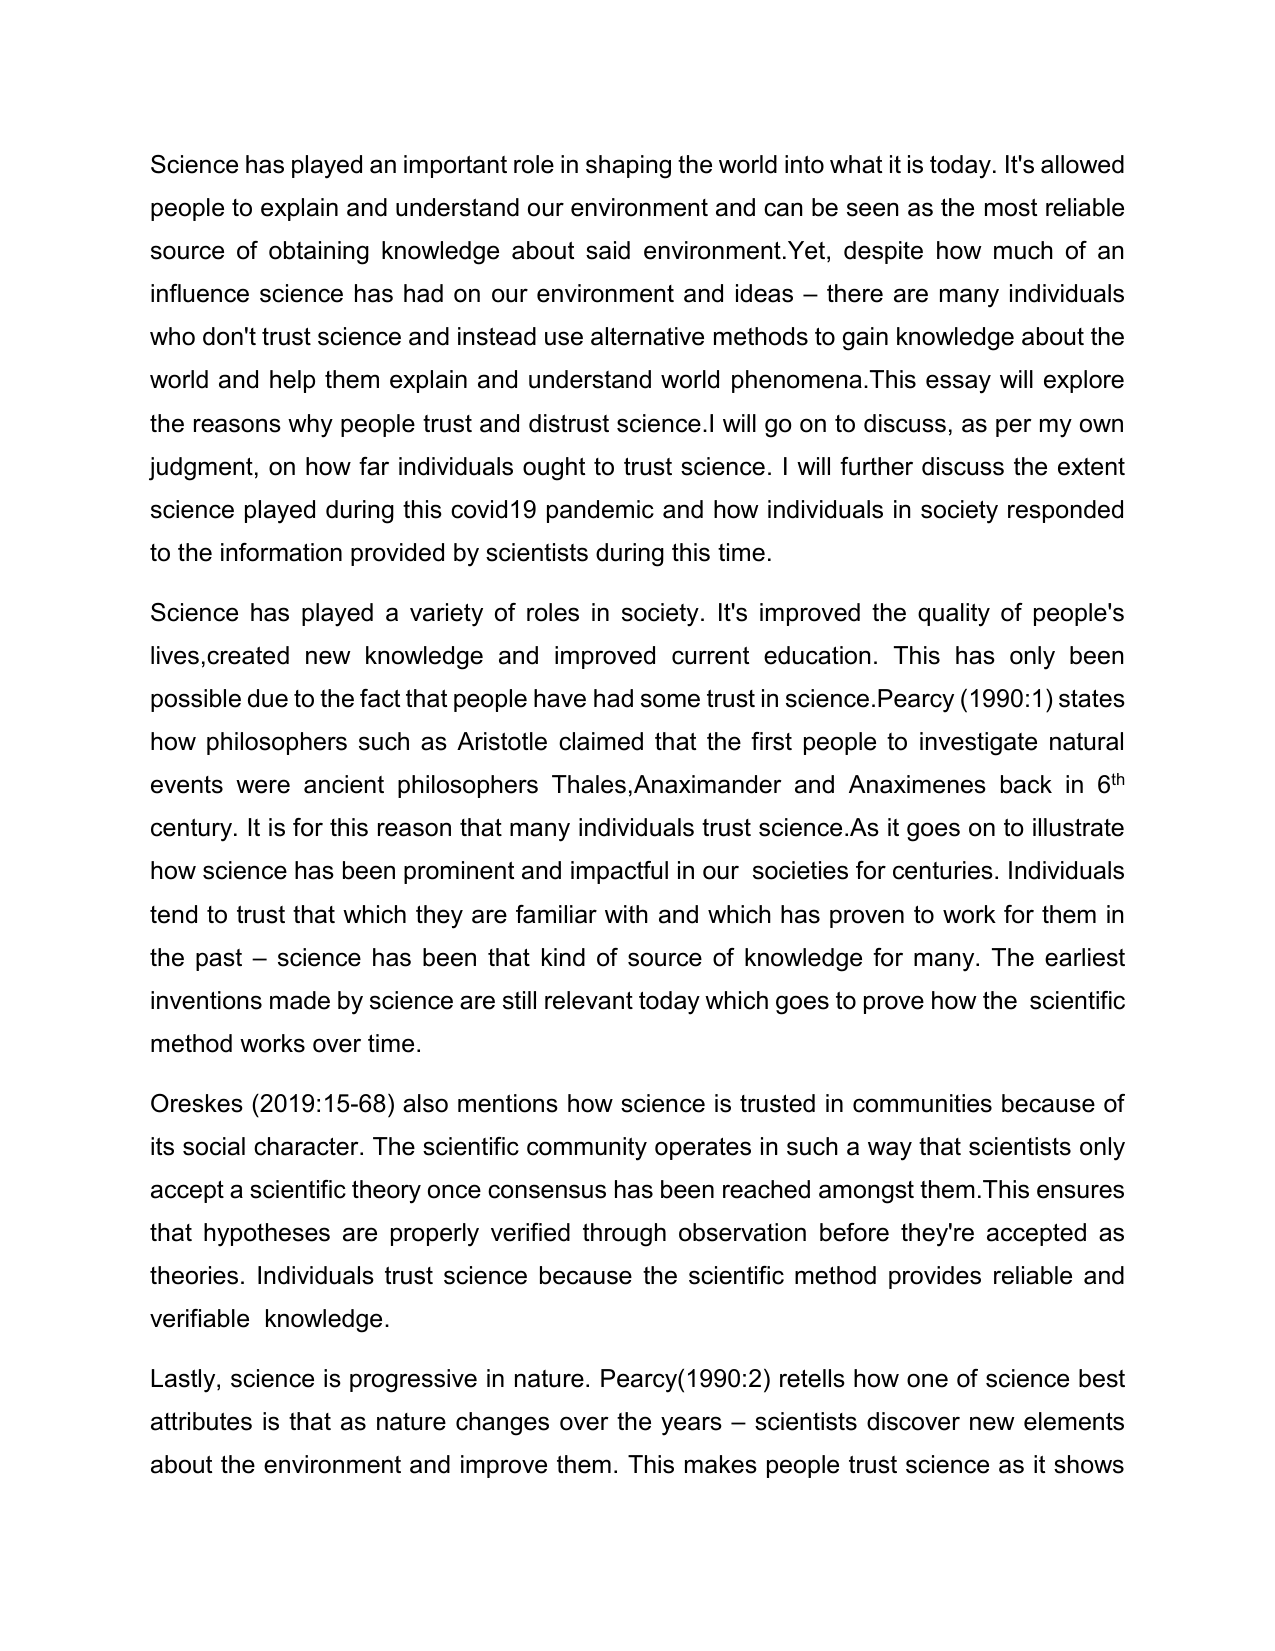 essay writing about modern science